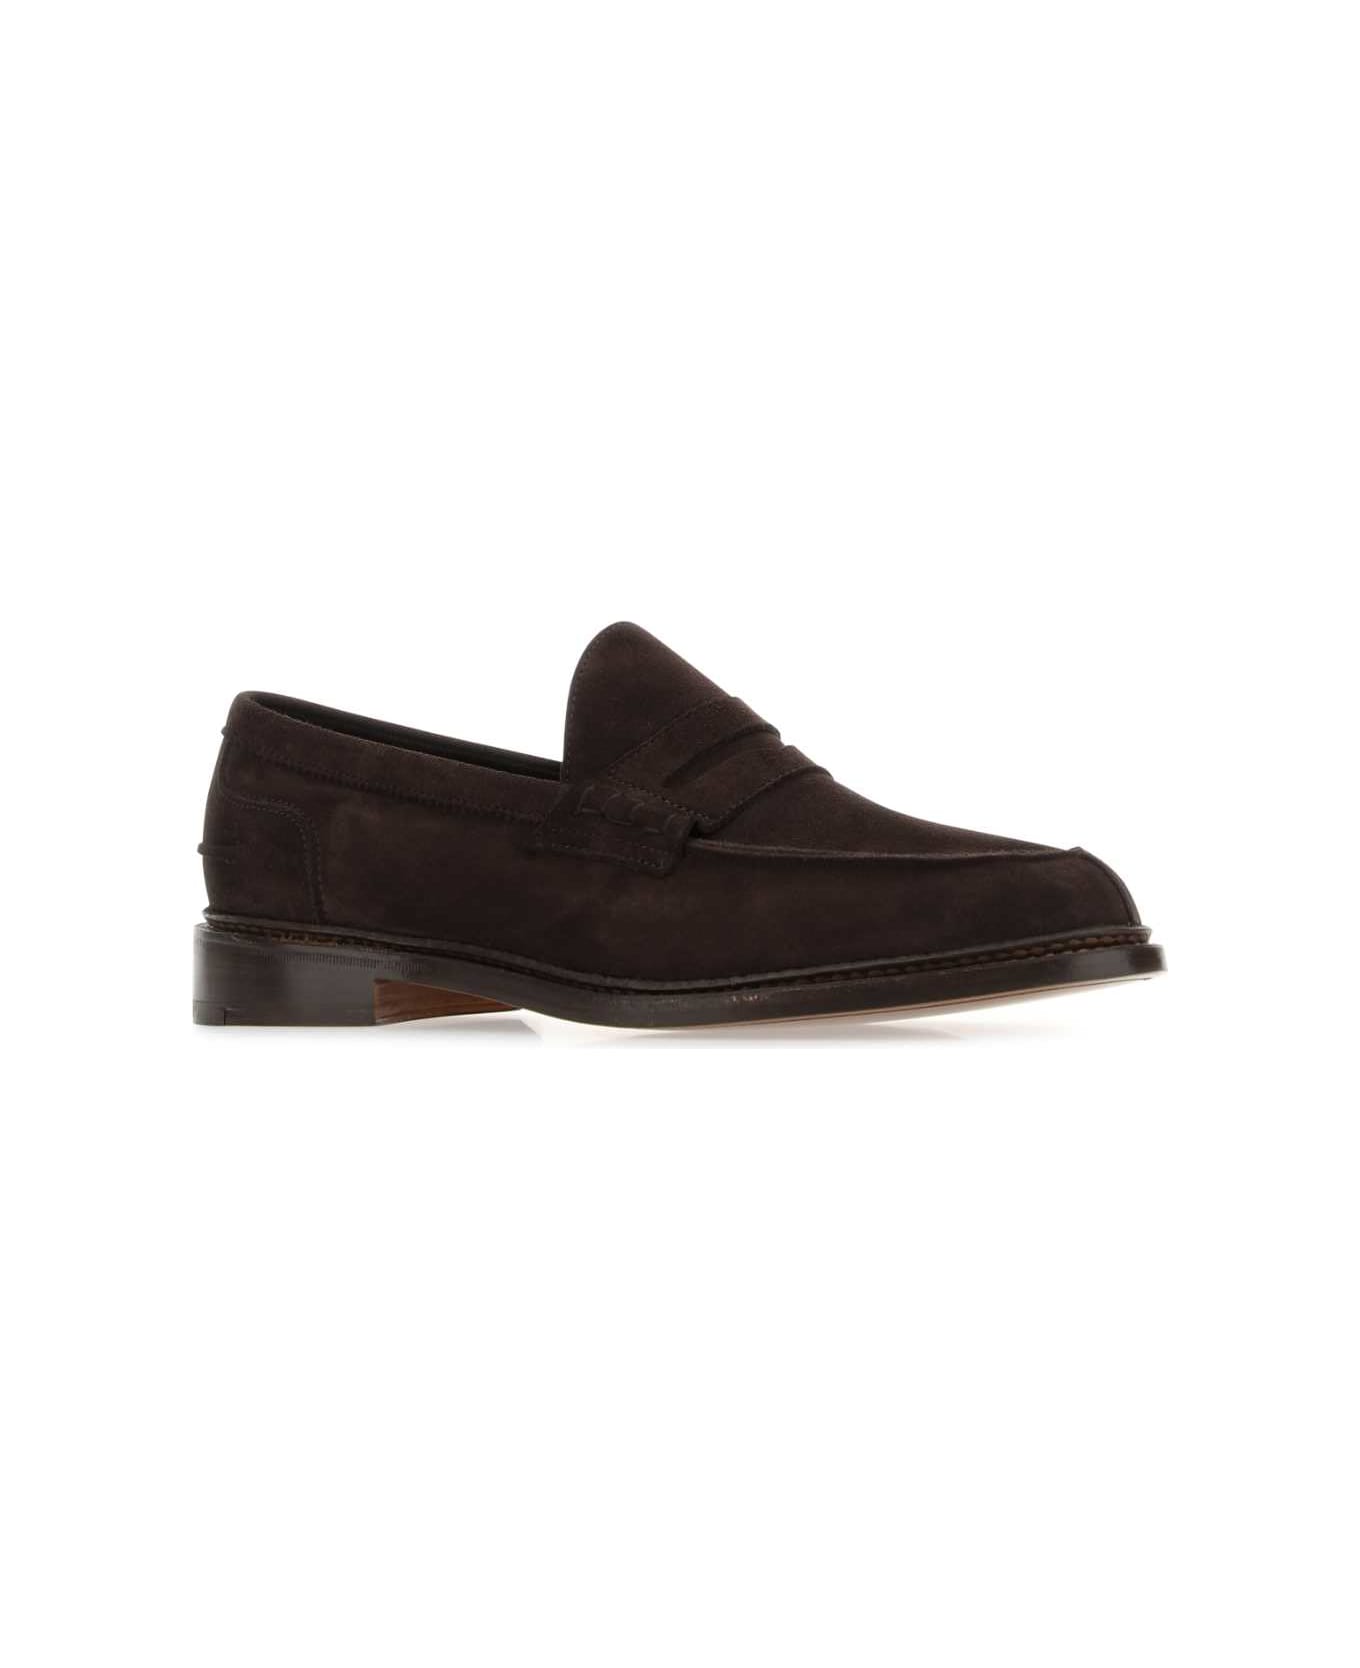 Tricker's Brown Suede Adam Loafers - COFFEE